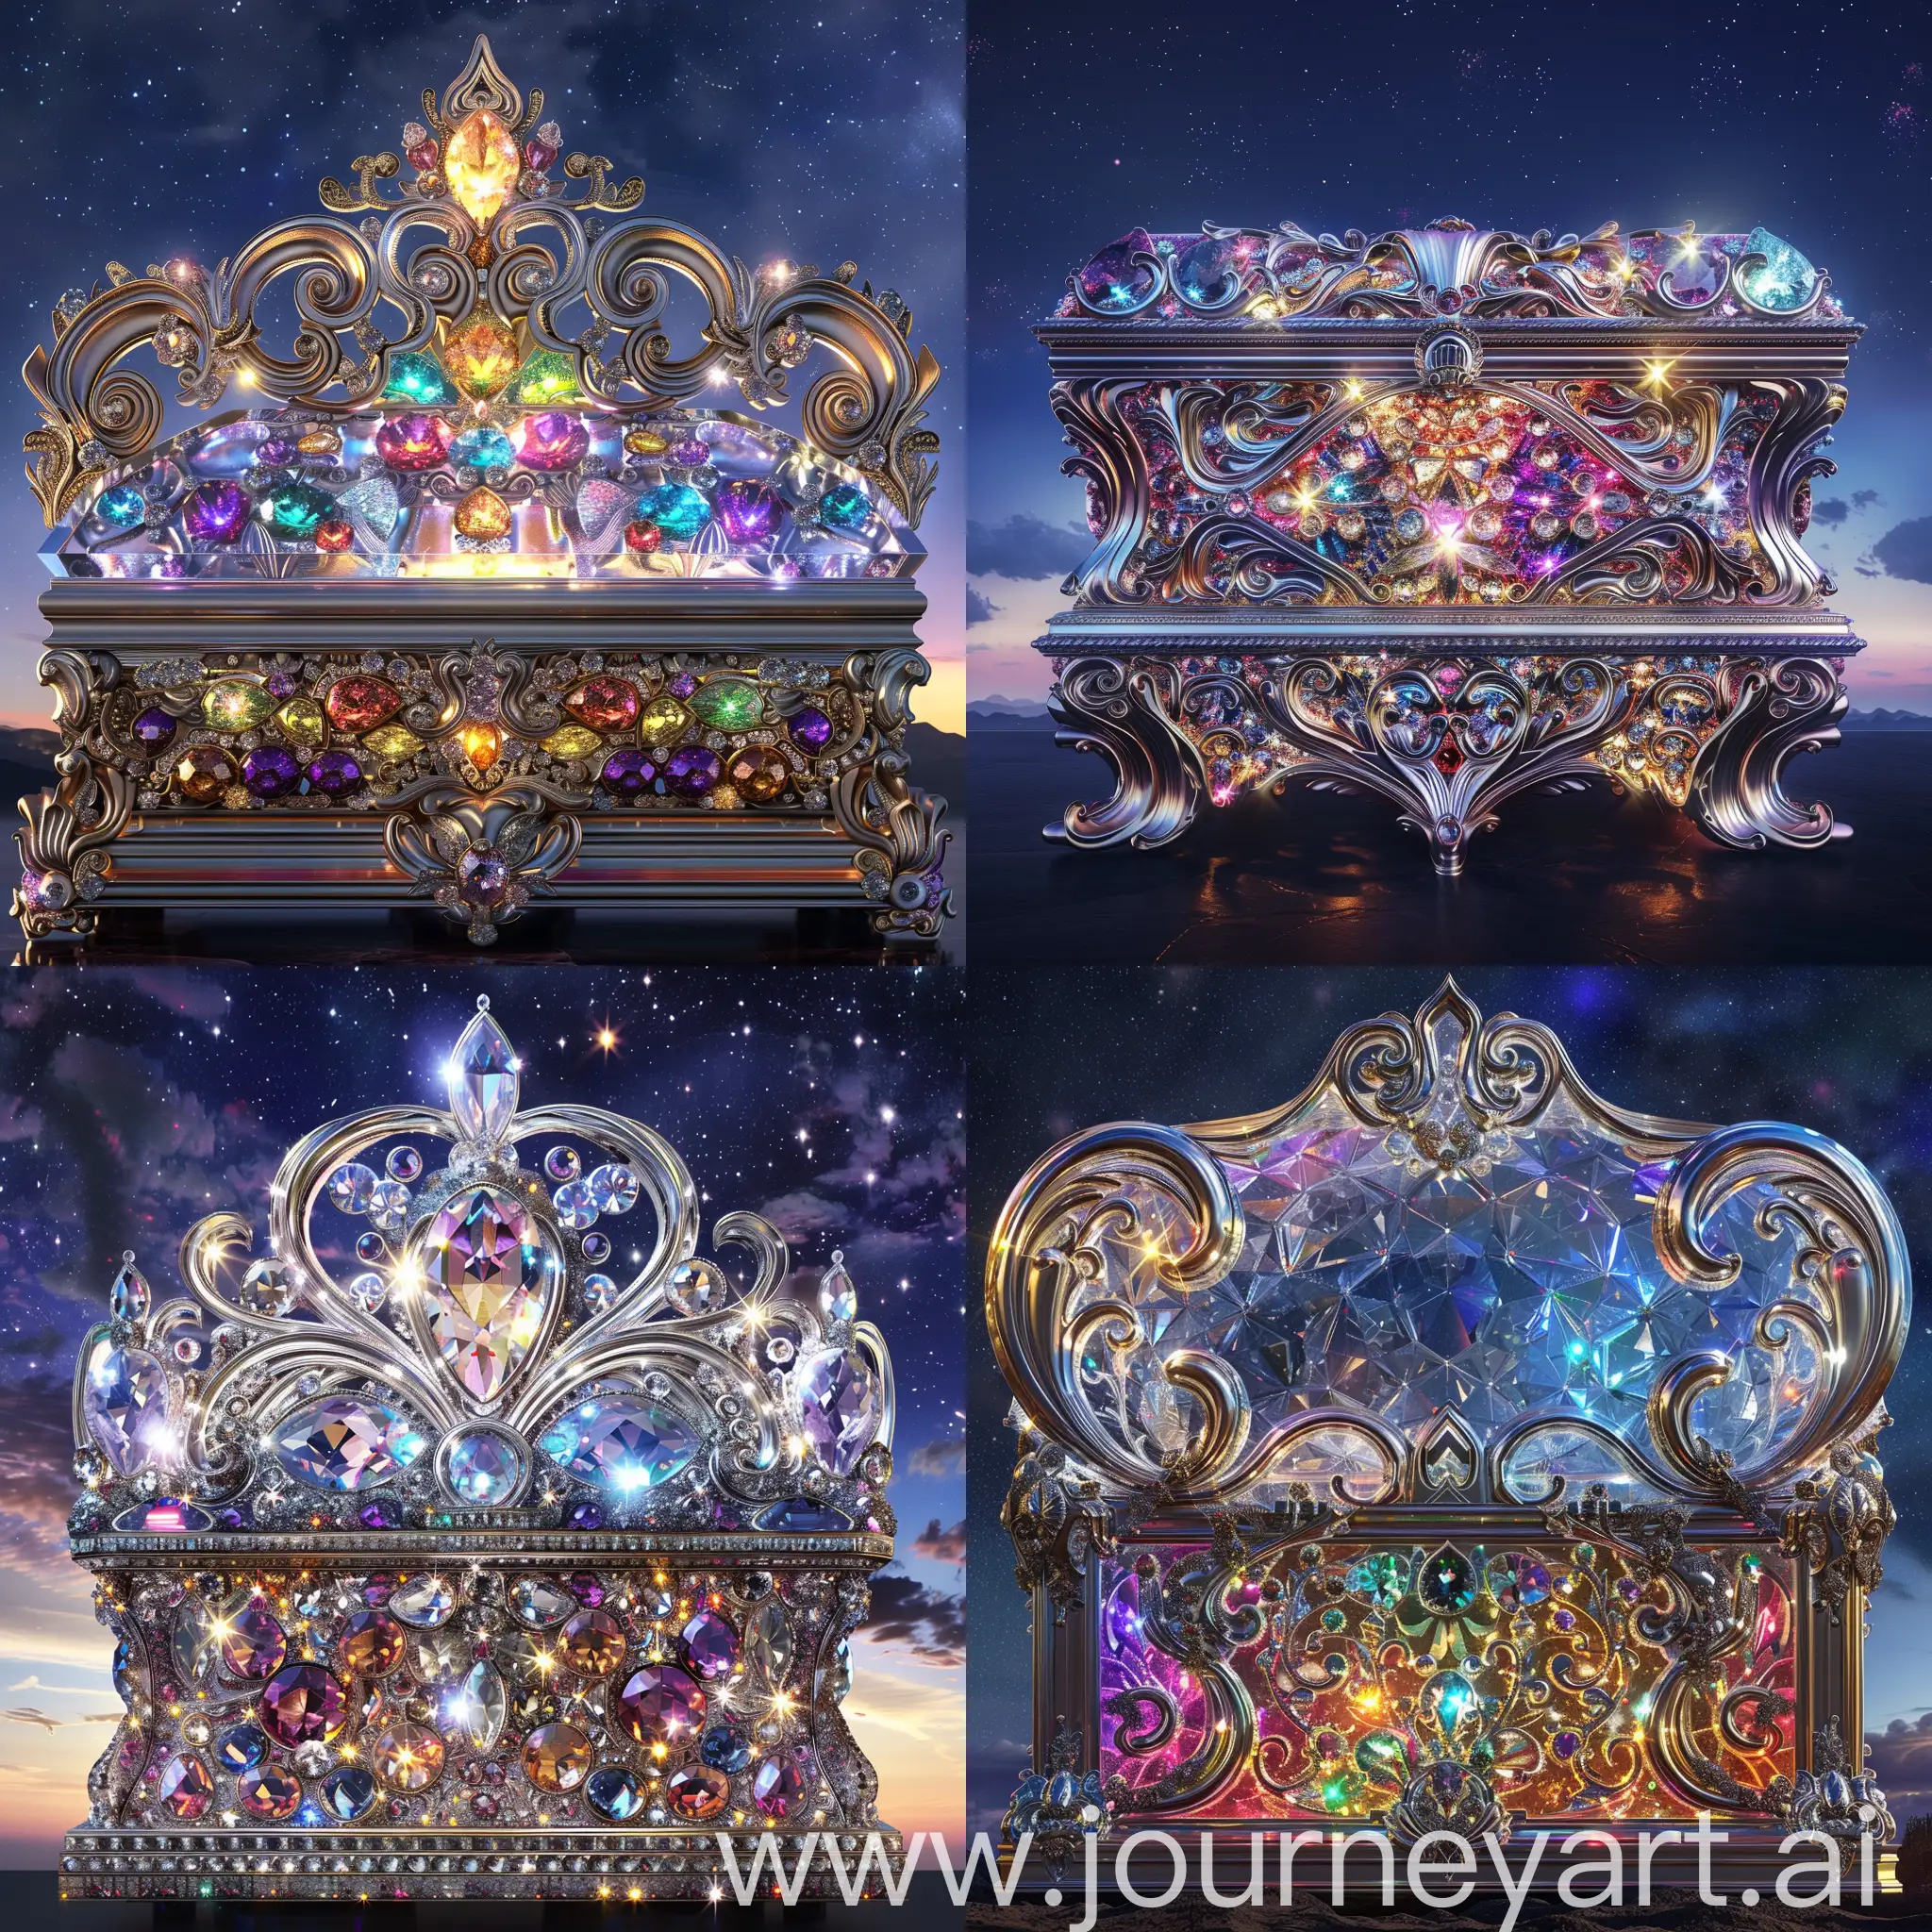 Fantasy-Crystal-Casket-with-Multicolored-Precious-Stones-against-a-Magical-Night-Sky